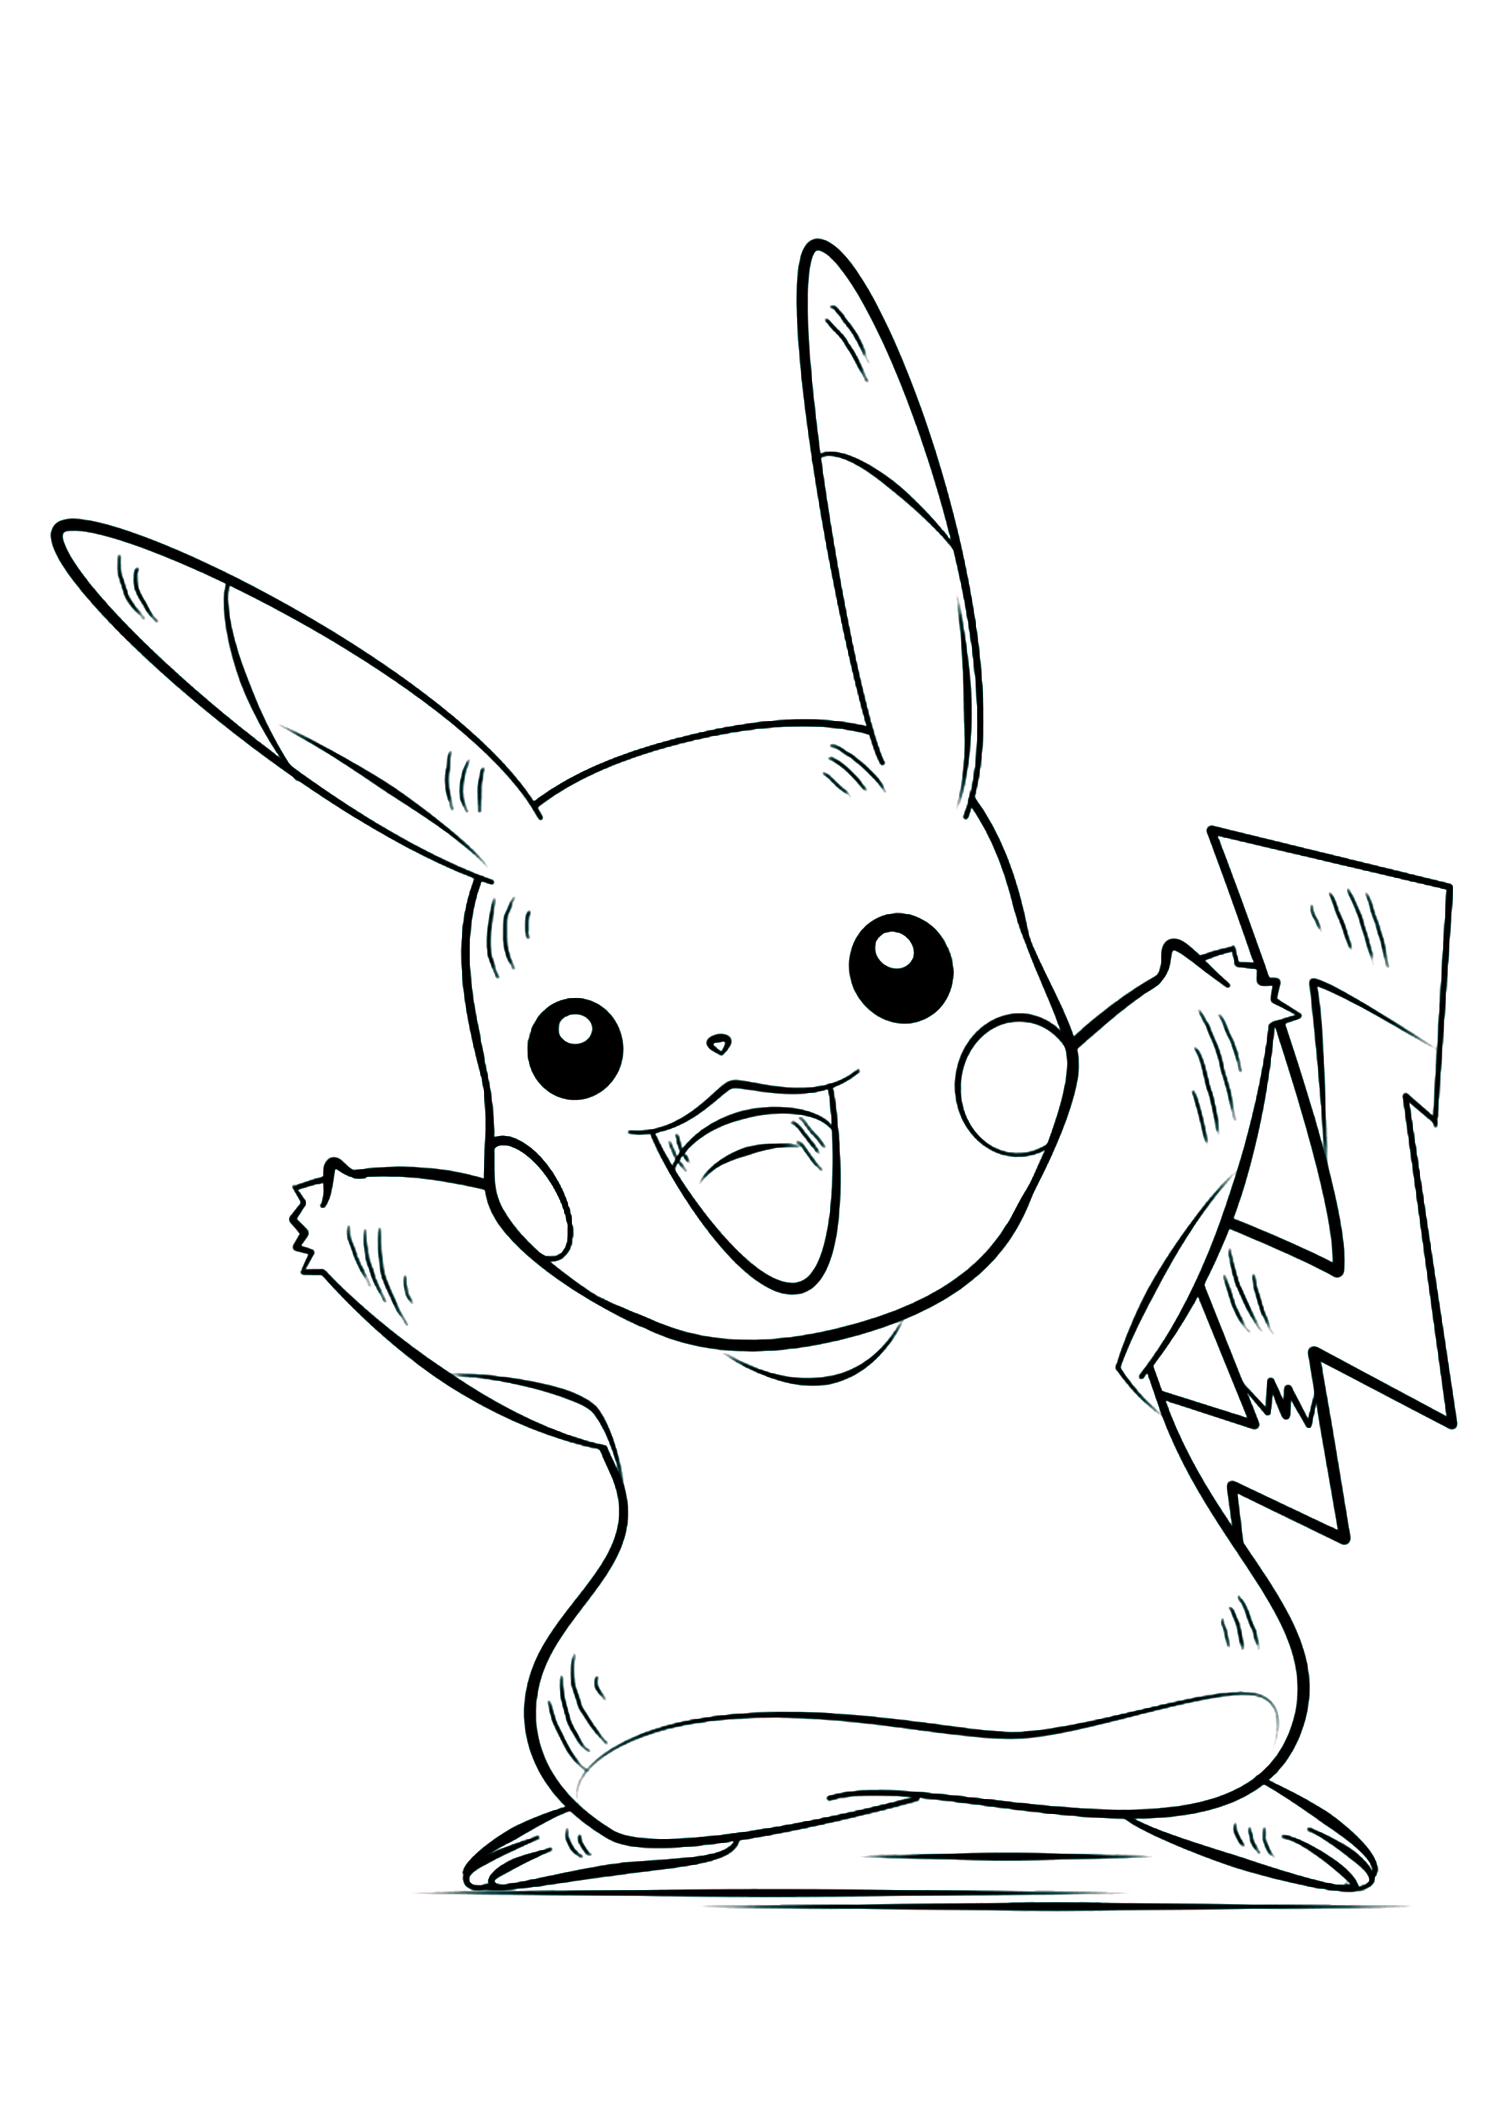 Pikachu (No.25). Pikachu Coloring page, Generation I Pokemon of type ElectrikPermission: All rights reserved © Pokemon company and Ken Sugimori.